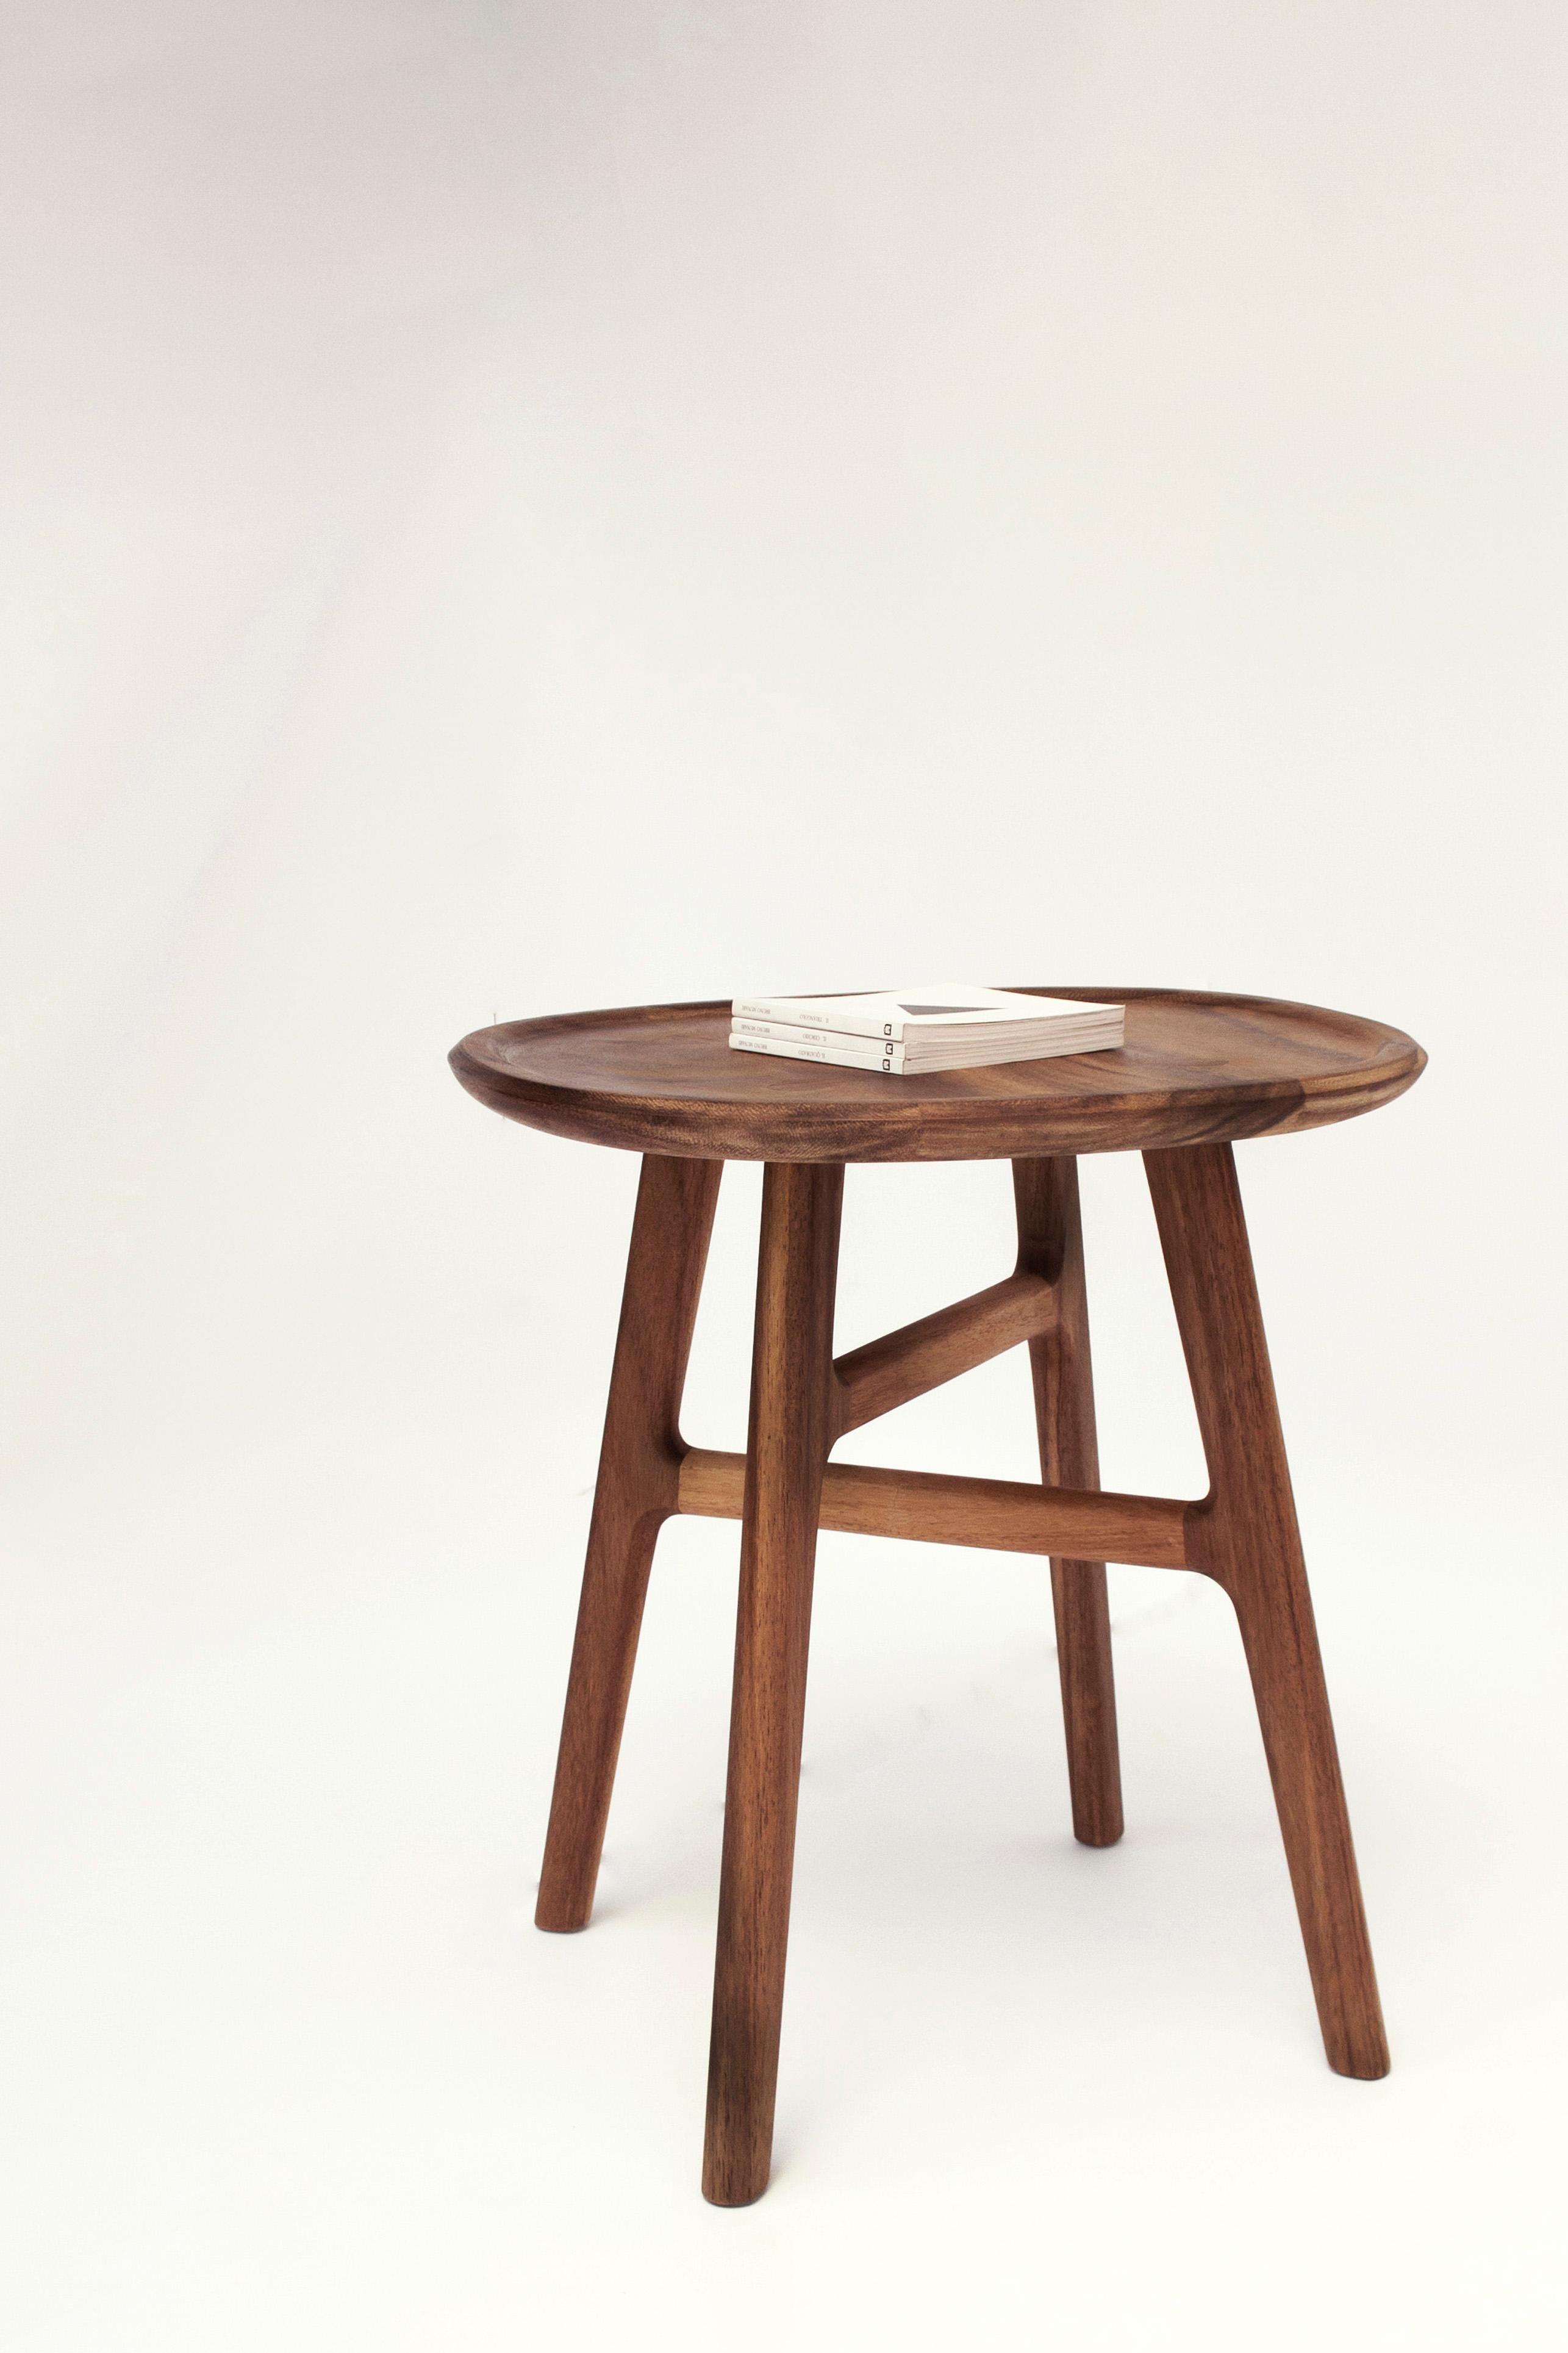 Mexican Desierto Sidetable 55, Tropical Hardwood, Design by Juskani Alonso For Sale